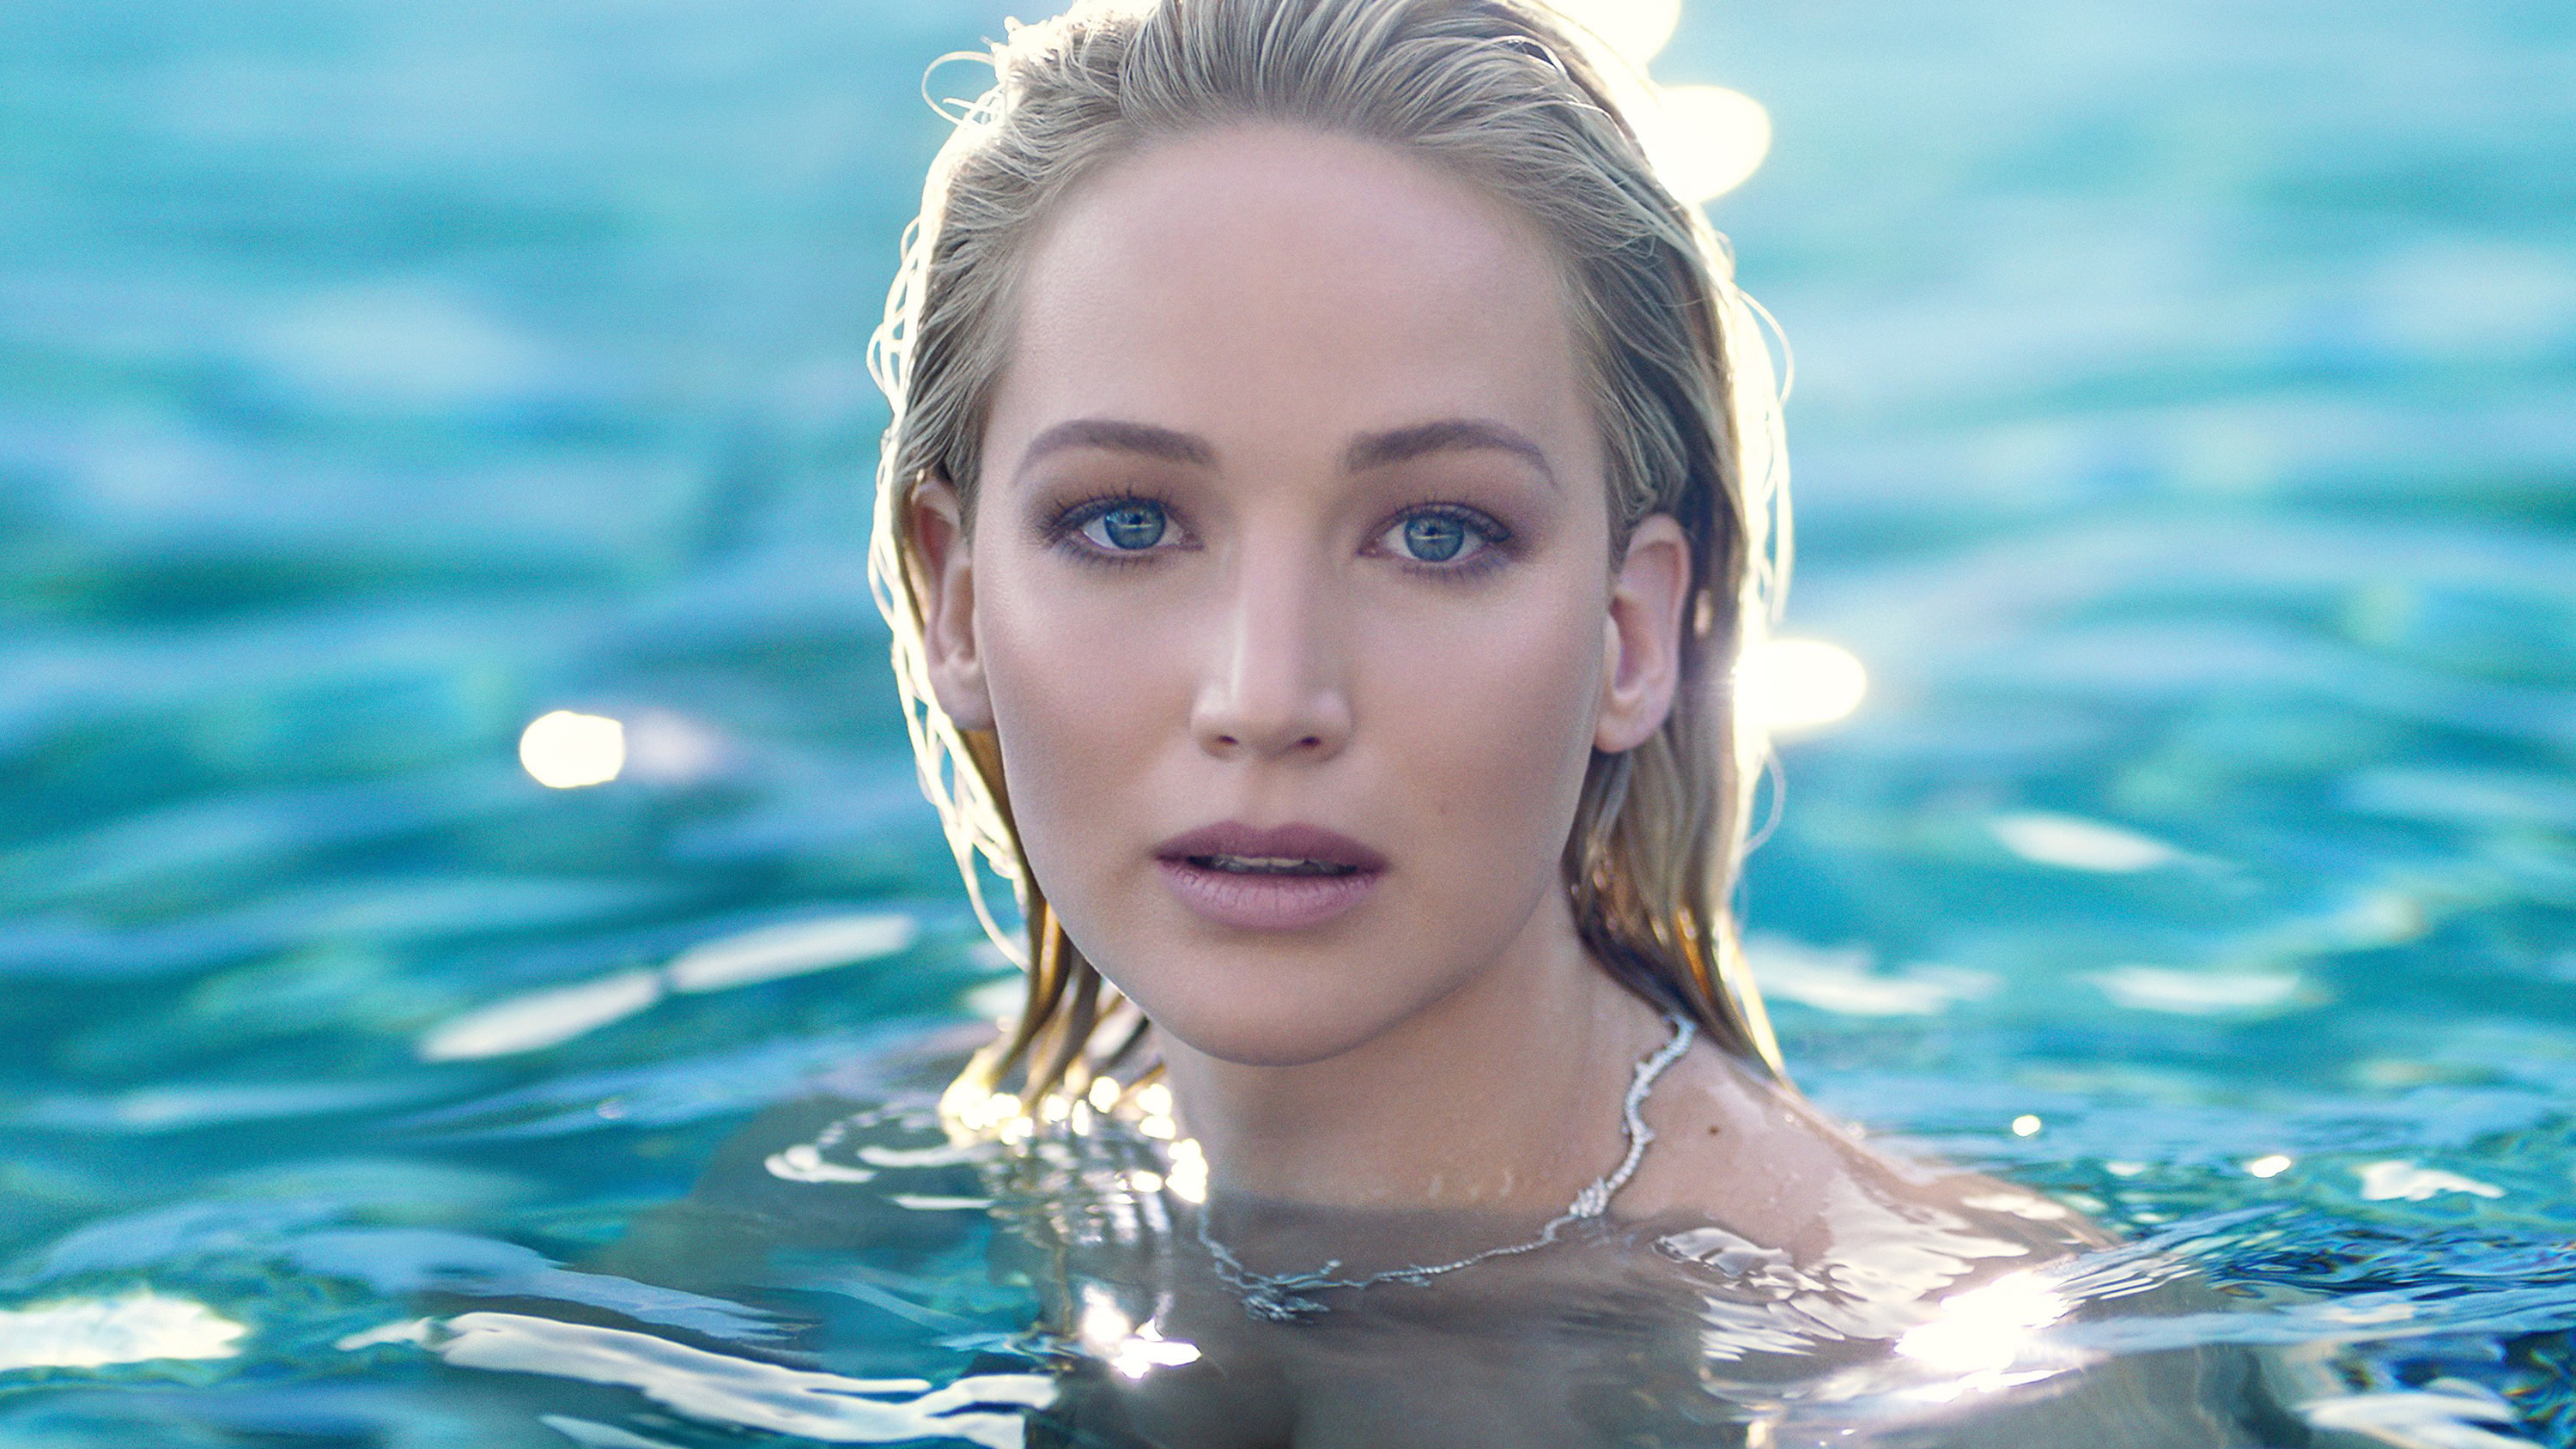 Jennifer Lawrence, portrait, headshot, one person, water, looking at camera